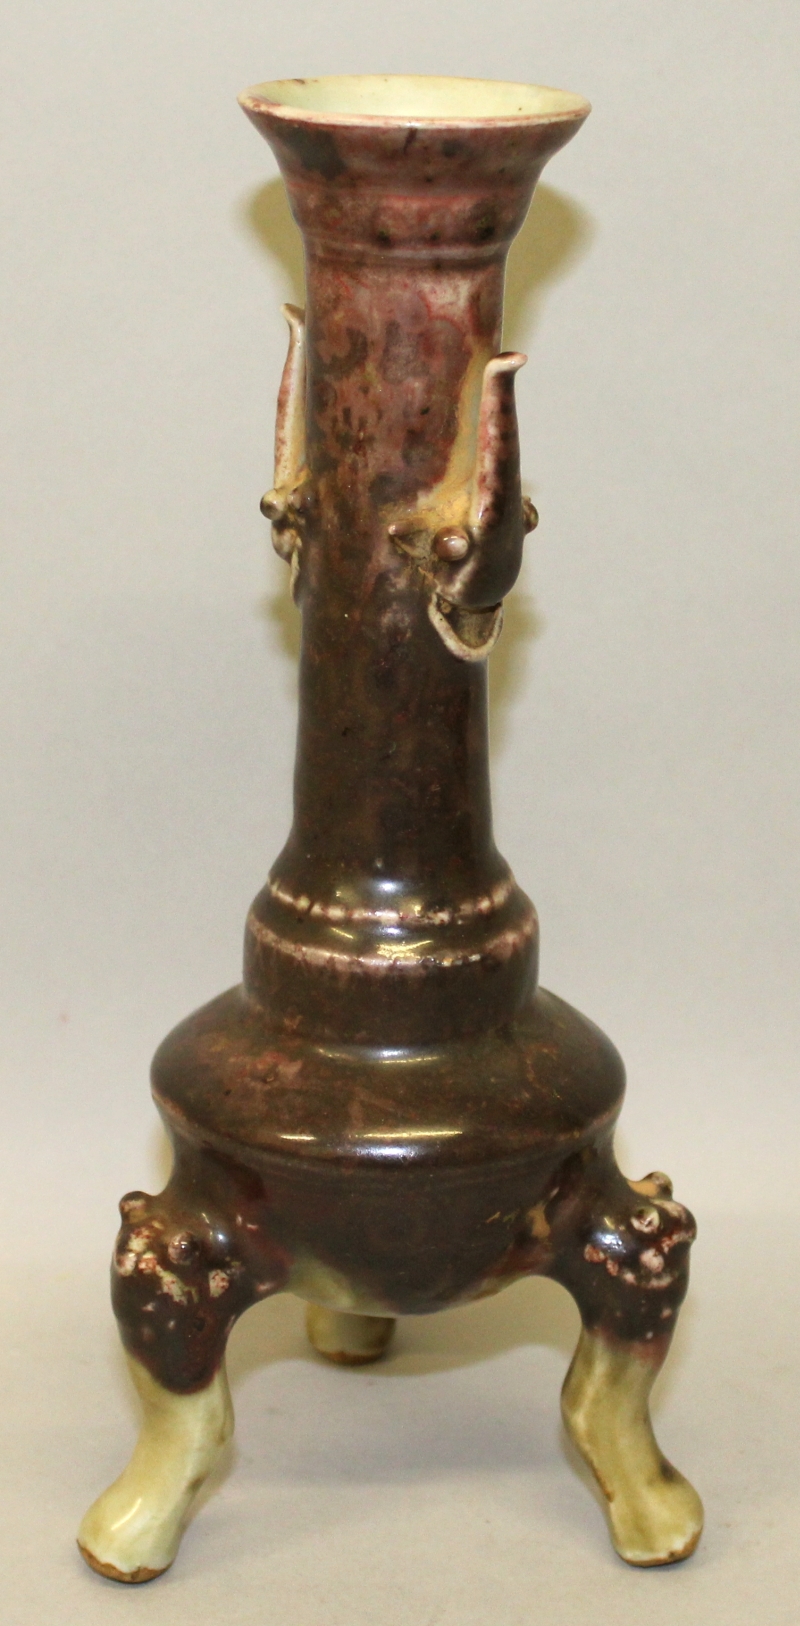 AN UNUSUAL CHINESE PORCELAIN TRIPOD CANDLESTICK, applied with a purple-red glaze and with inverted - Image 2 of 5